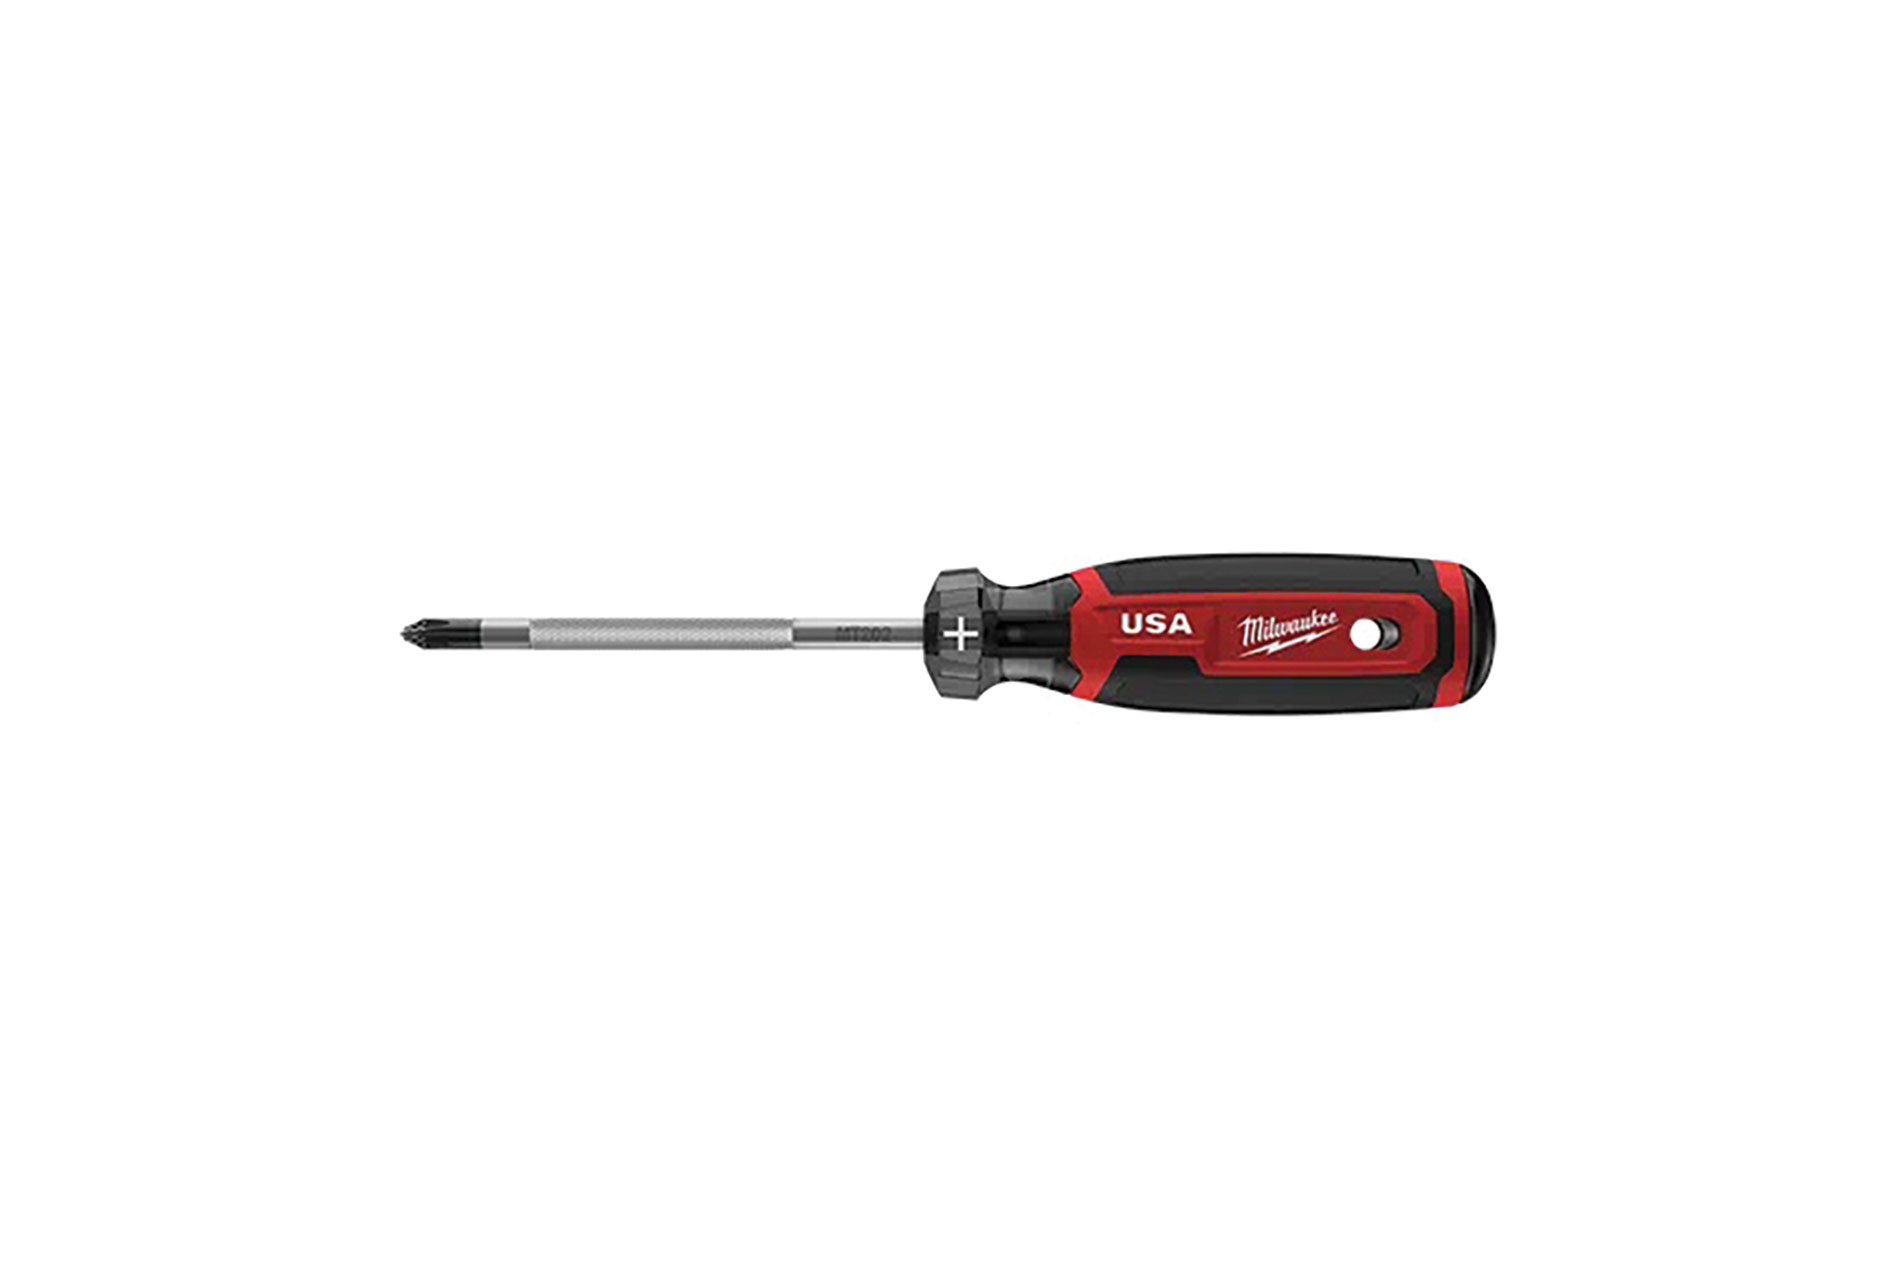 Red Phillips-Head screwdriver with USA and Milwaukee on the handle. Image by Milwaukee Tool.